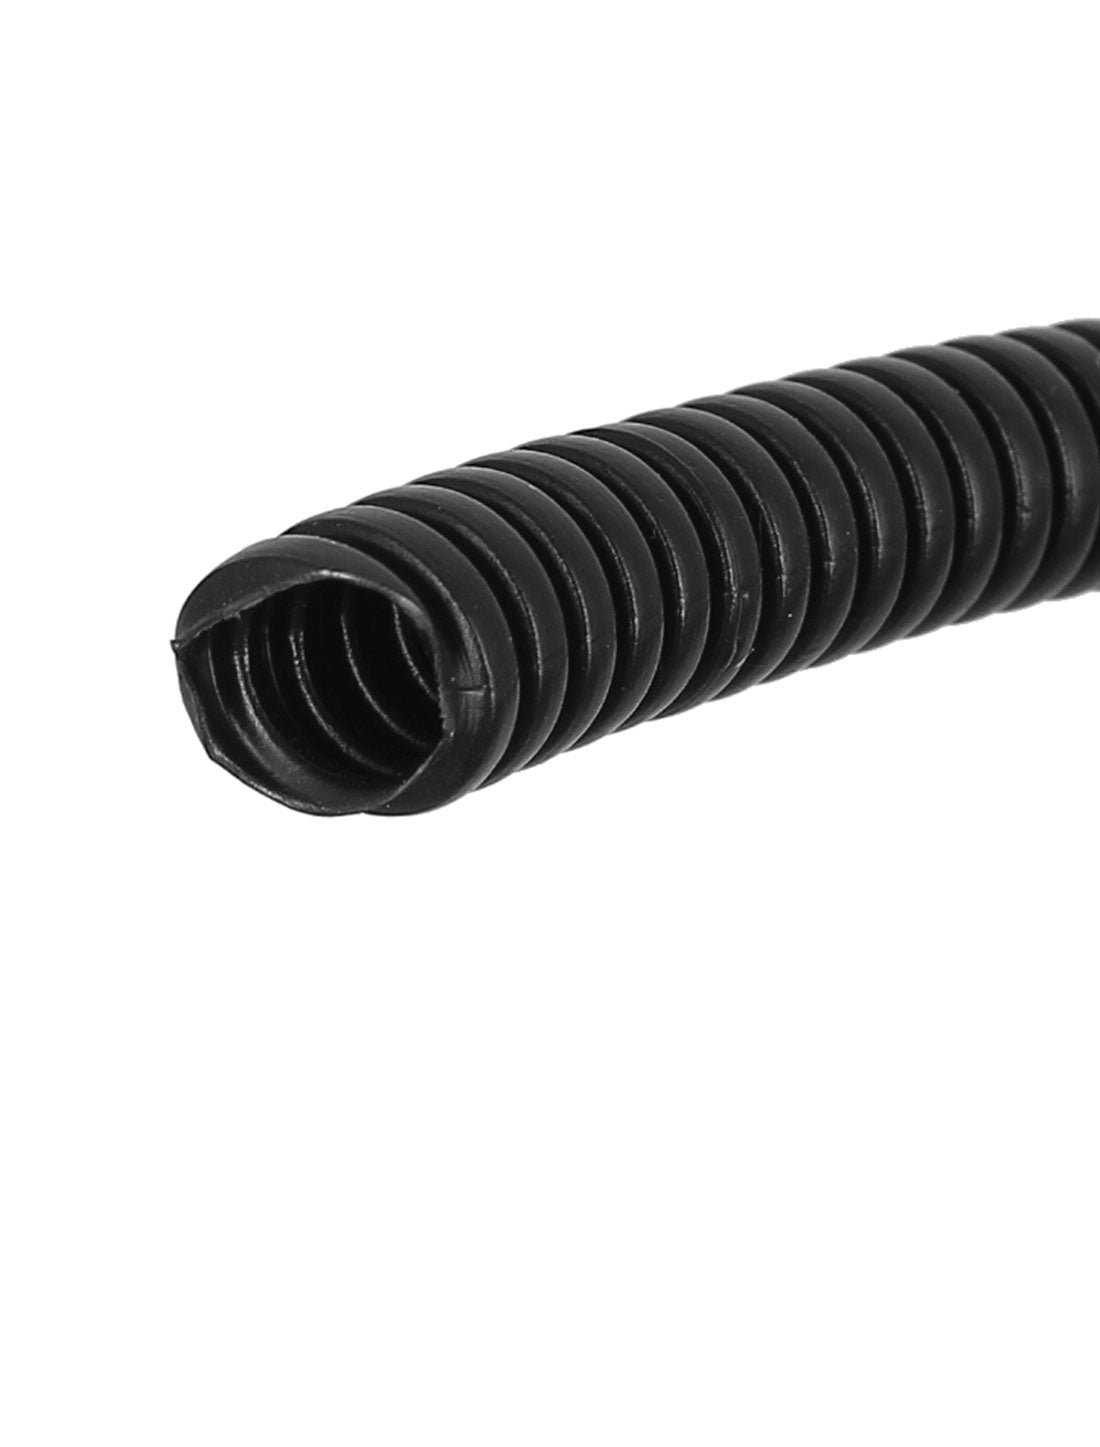 uxcell Uxcell 2.97 M 7 x 10 mm Plastic Corrugated Conduit Tube for Garden,Office Black